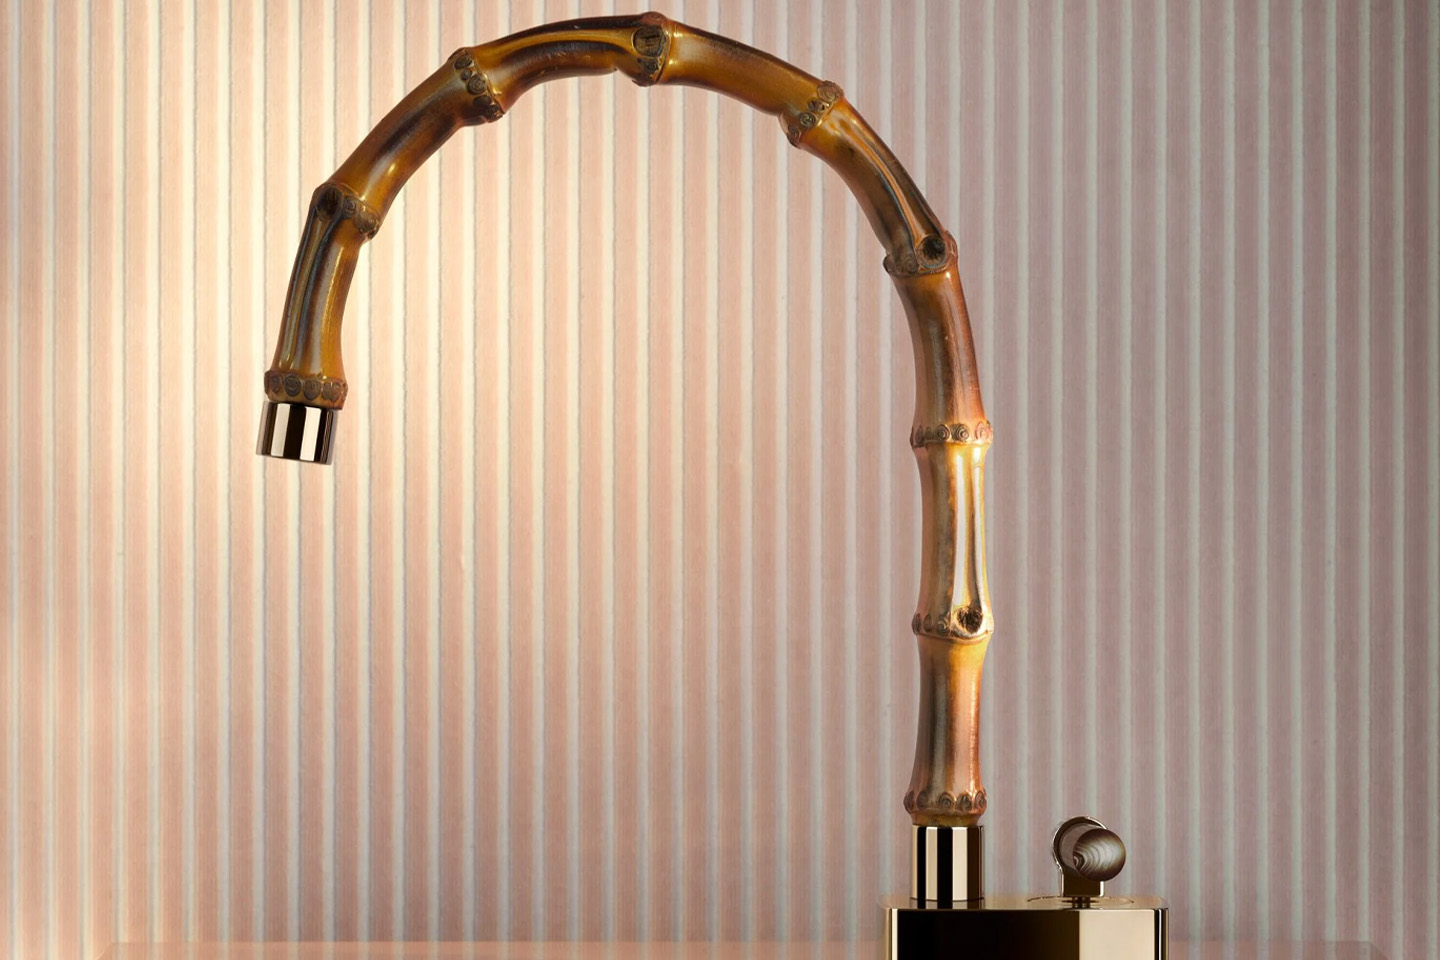 The fanciest tap I`ve ever seen is built from bamboo & is super sustainable